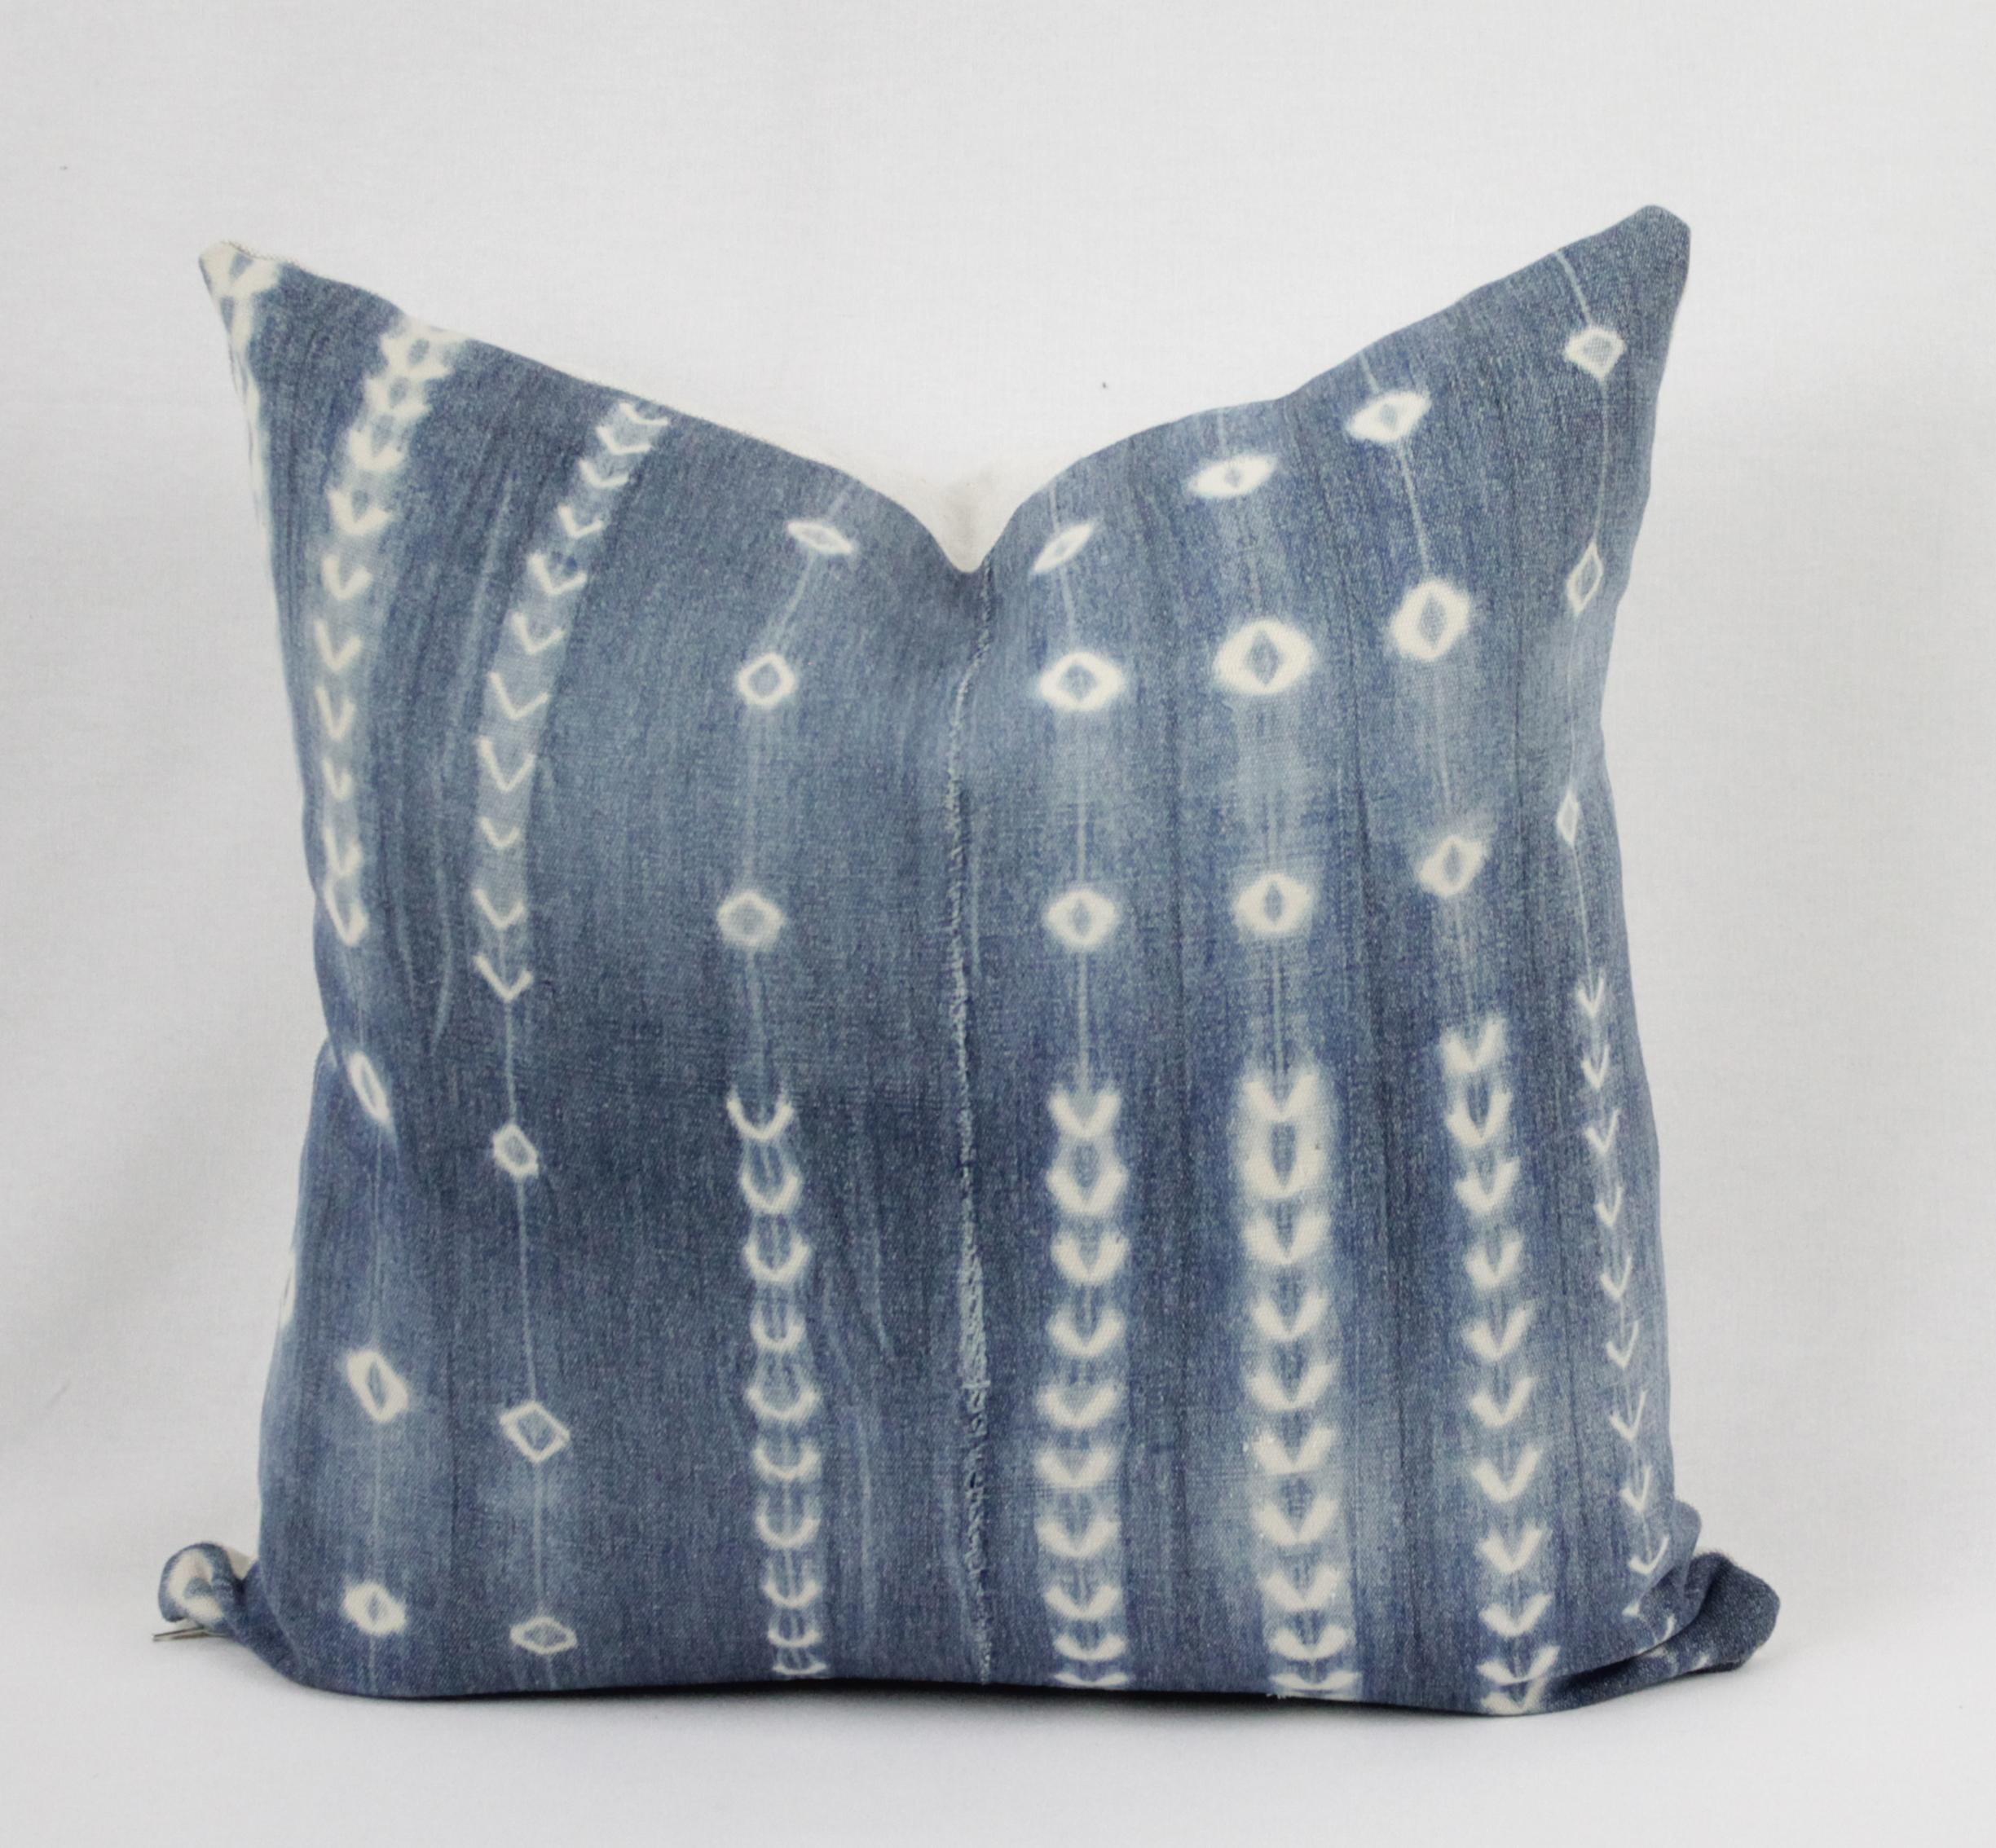 Vintage blue and white batik style pillow, with zipper closure. Pillow has vertical exposed seams and front is lined in white linen. Back is in a natural color linen and finished with overlocked edges. Main color is a medium shade of blue and off